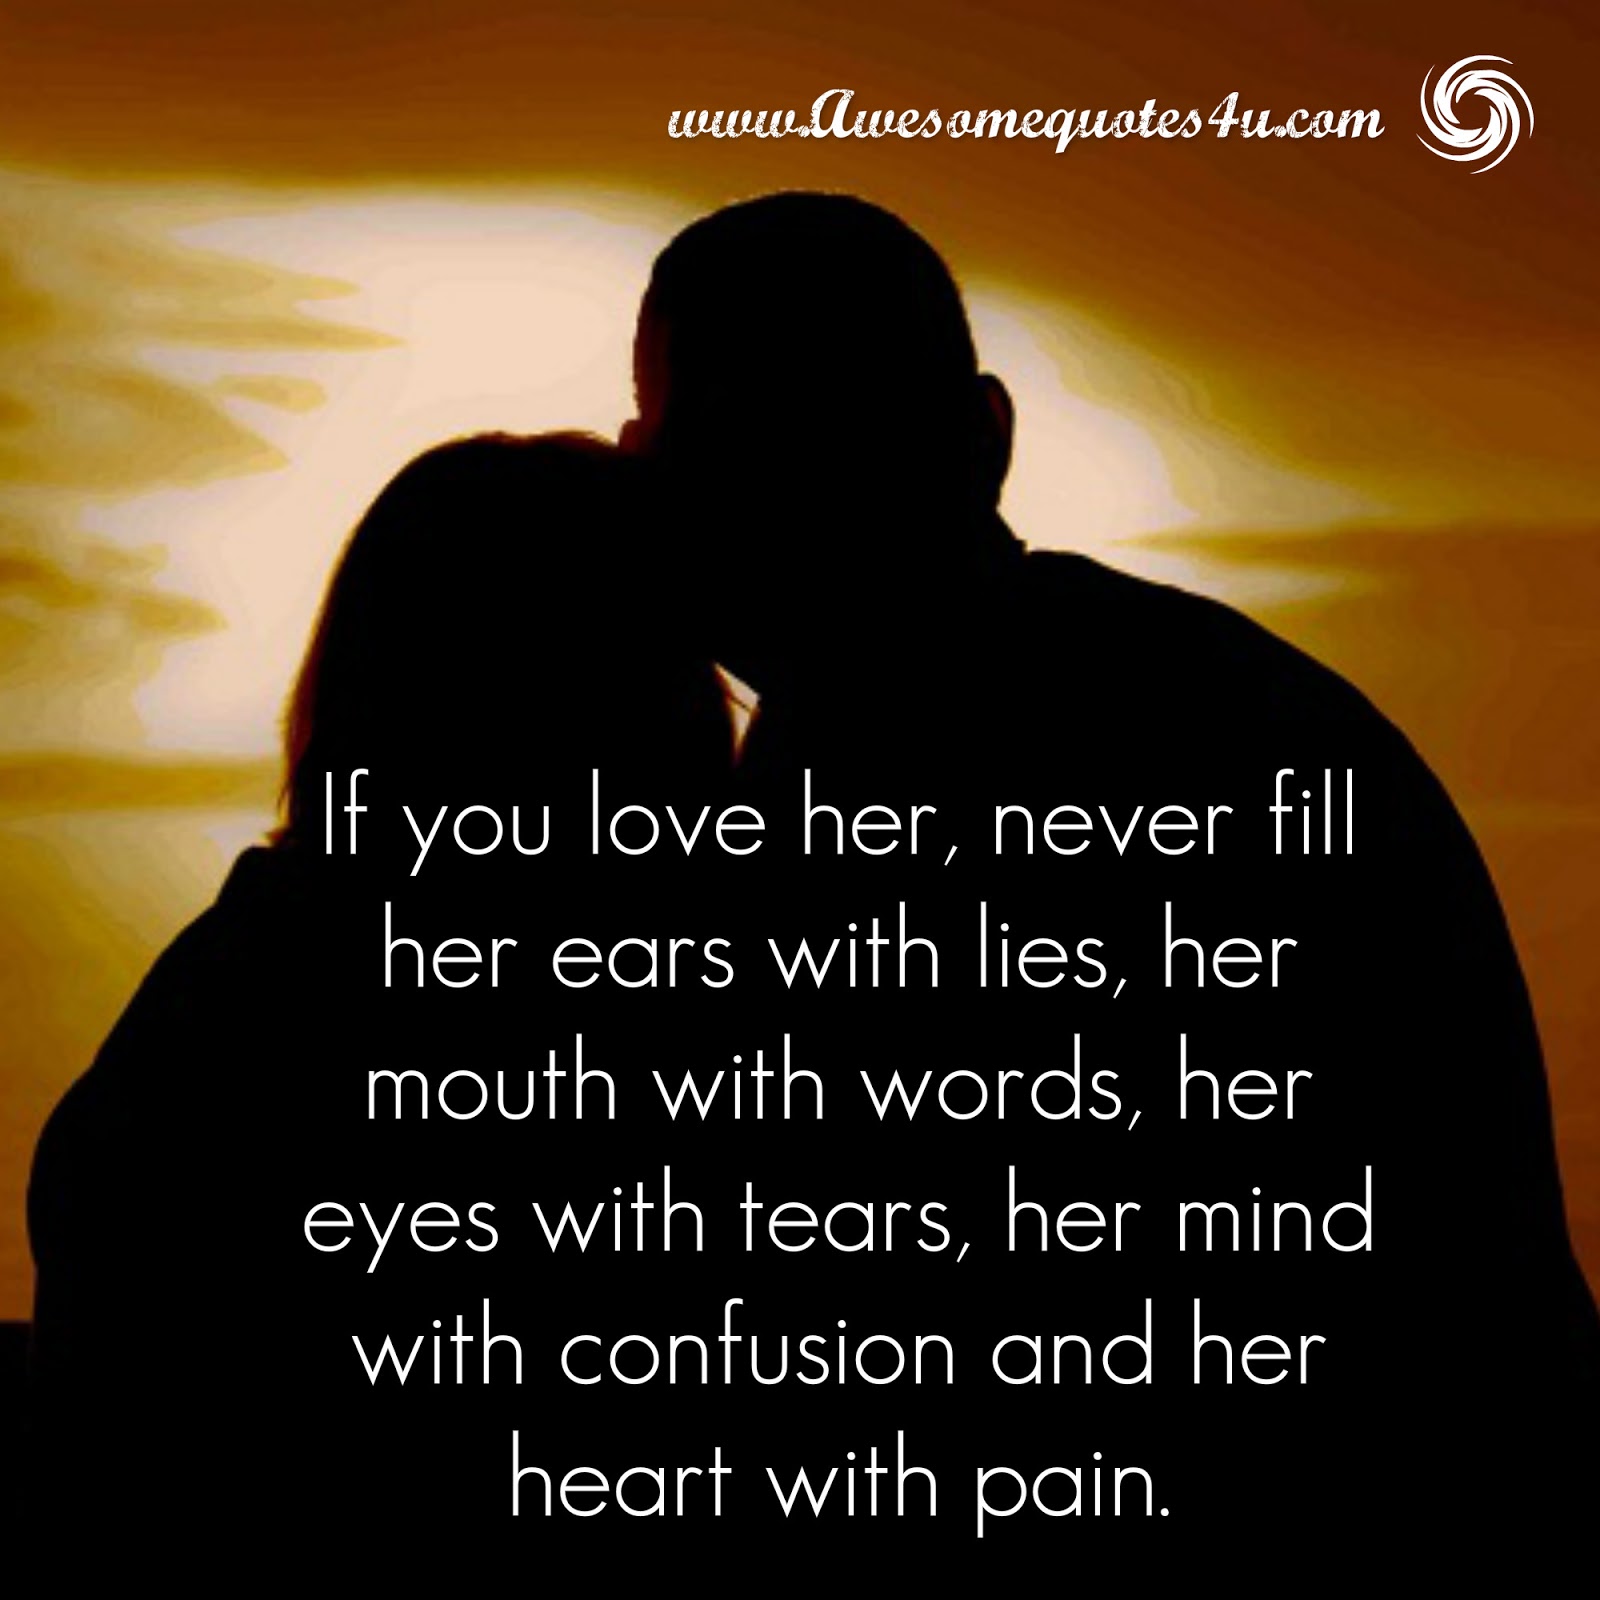 Awesomequotes4u.com: If you love her